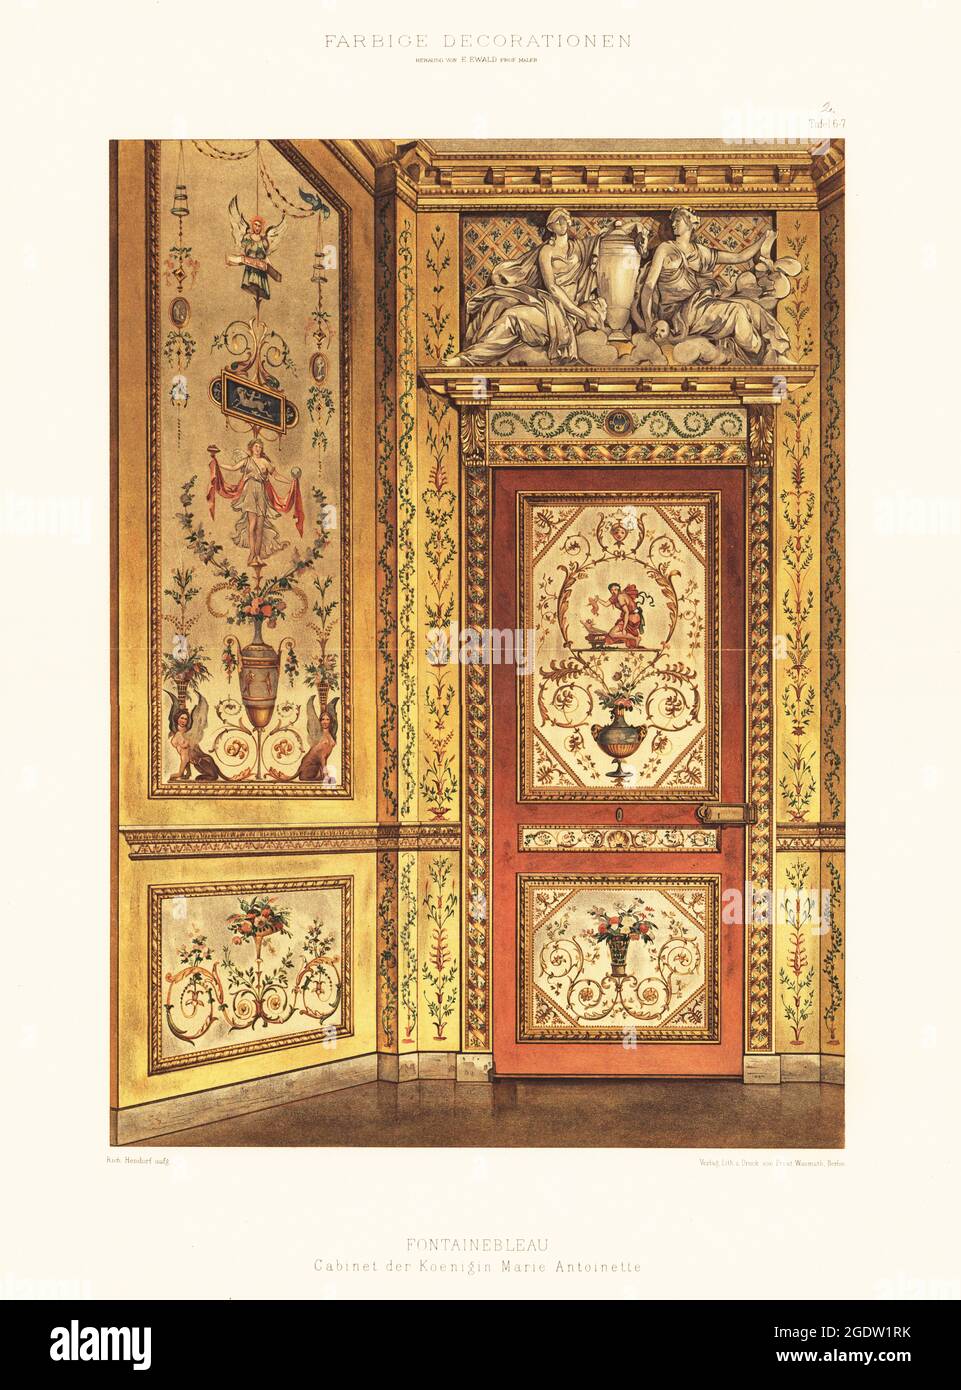 Wall panels and door in Queen Marie Antoinette's room, Palace of Fontainebleau, 18th century. Cabinet der Koeingin Marie Antoinette, Chateau de Fontainebleau. Chromolithograph by Richard Hendorf from Ernst Ewald’s Farbige decorationen, alter und never Zeit (Color decoration, ancient and new eras), Ernst Wasmuth, Berlin, 1896. Stock Photo